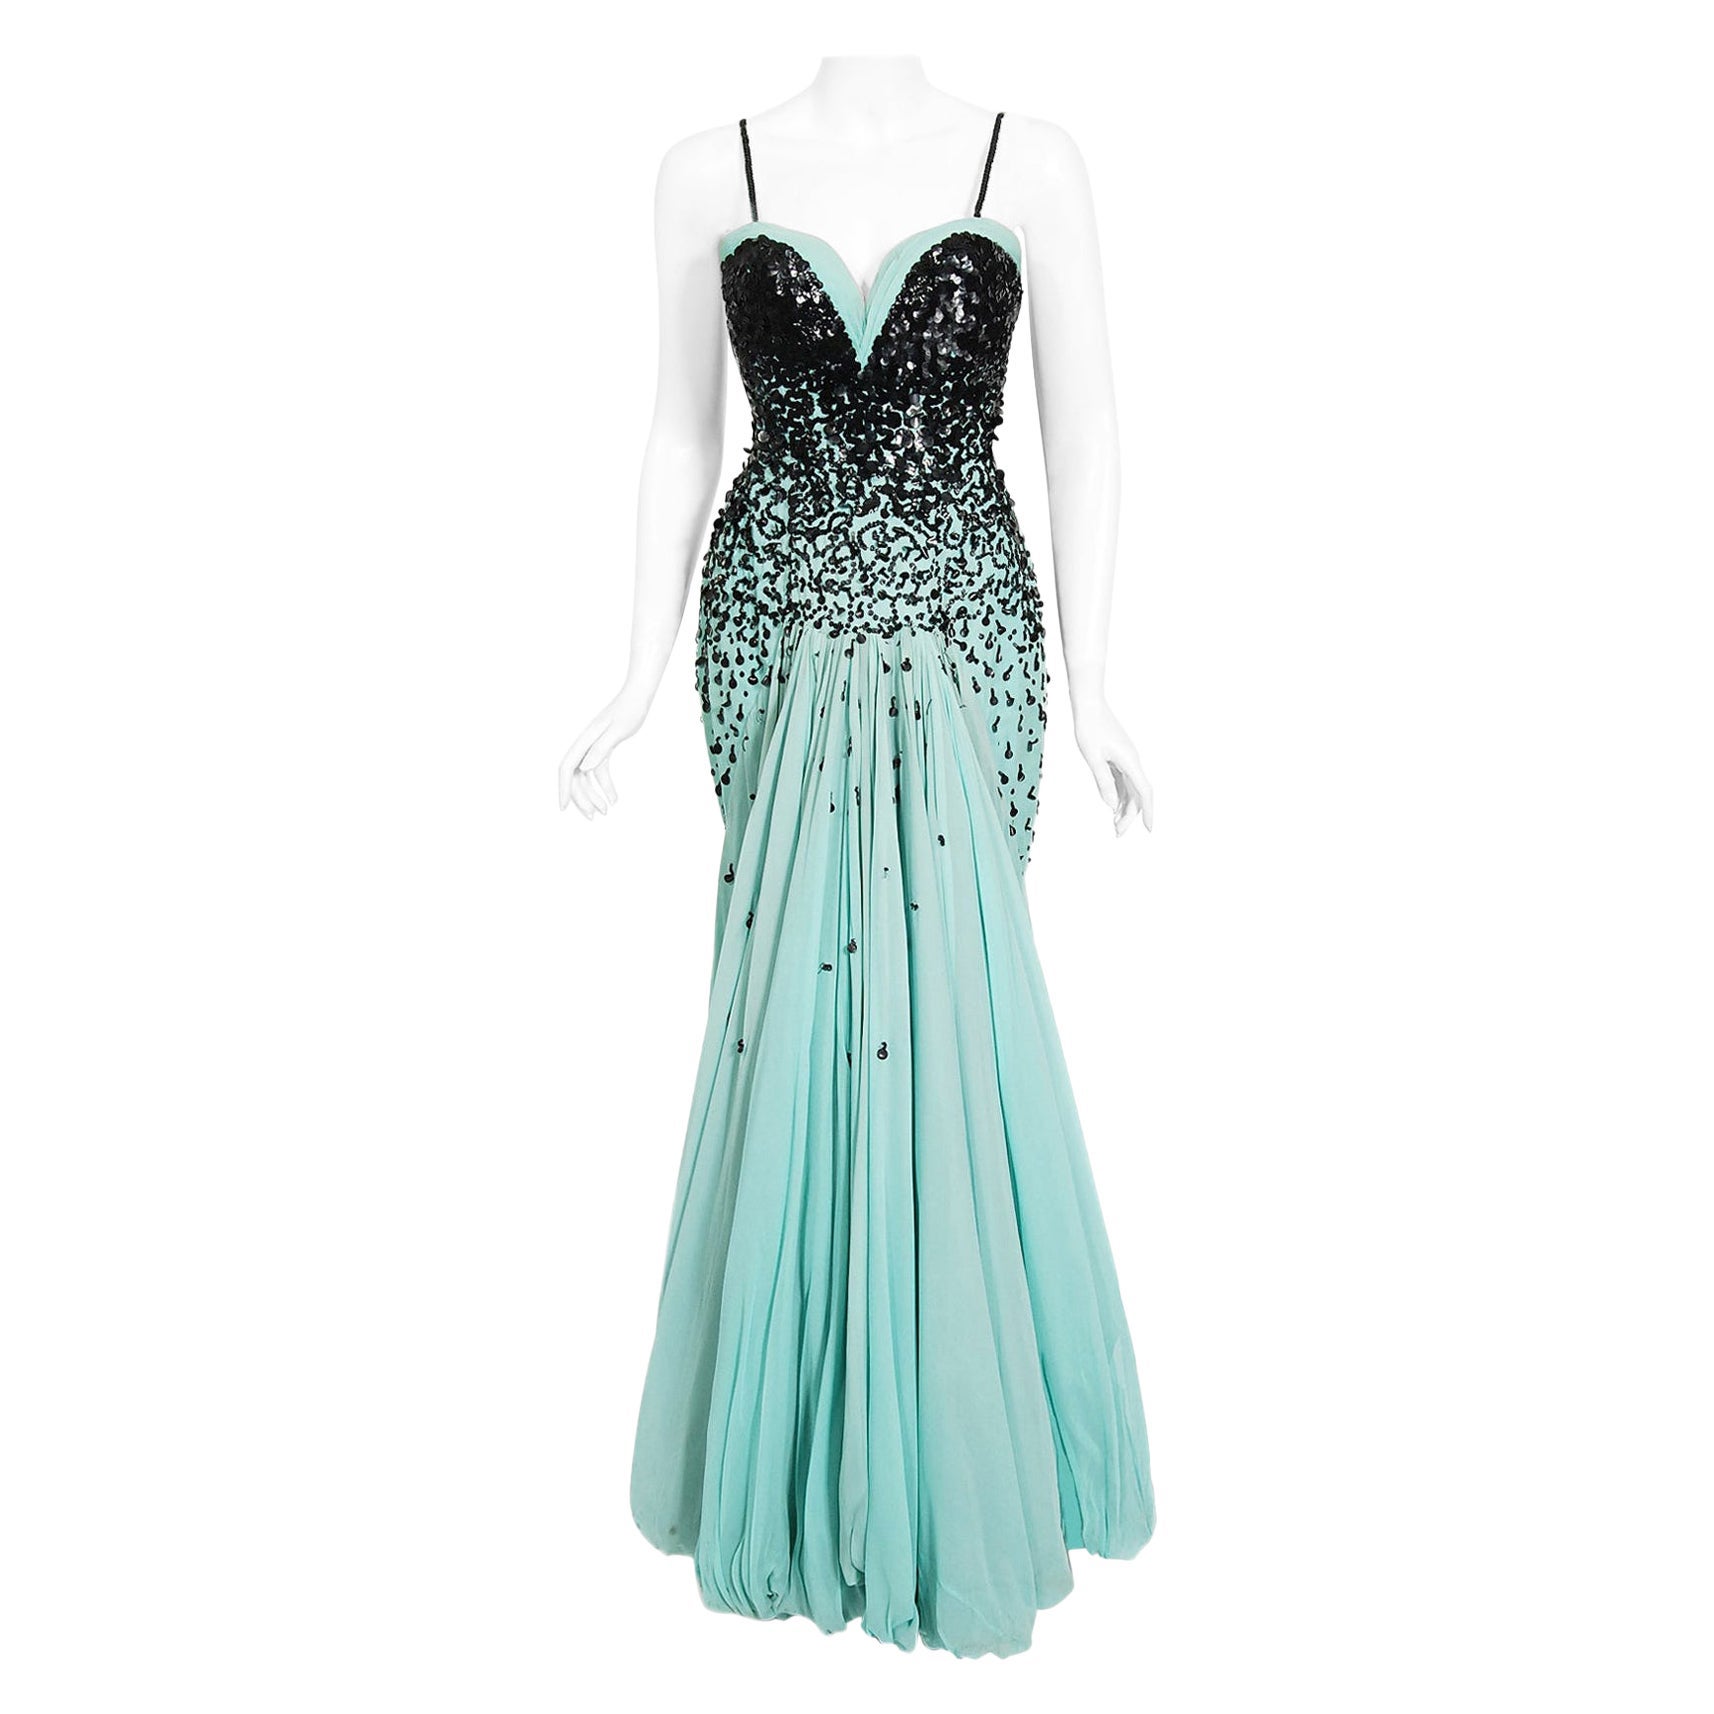 Vintage 1950's Yma Sumac Custom Couture Beaded Blue Silk Hourglass Gown Ensemble